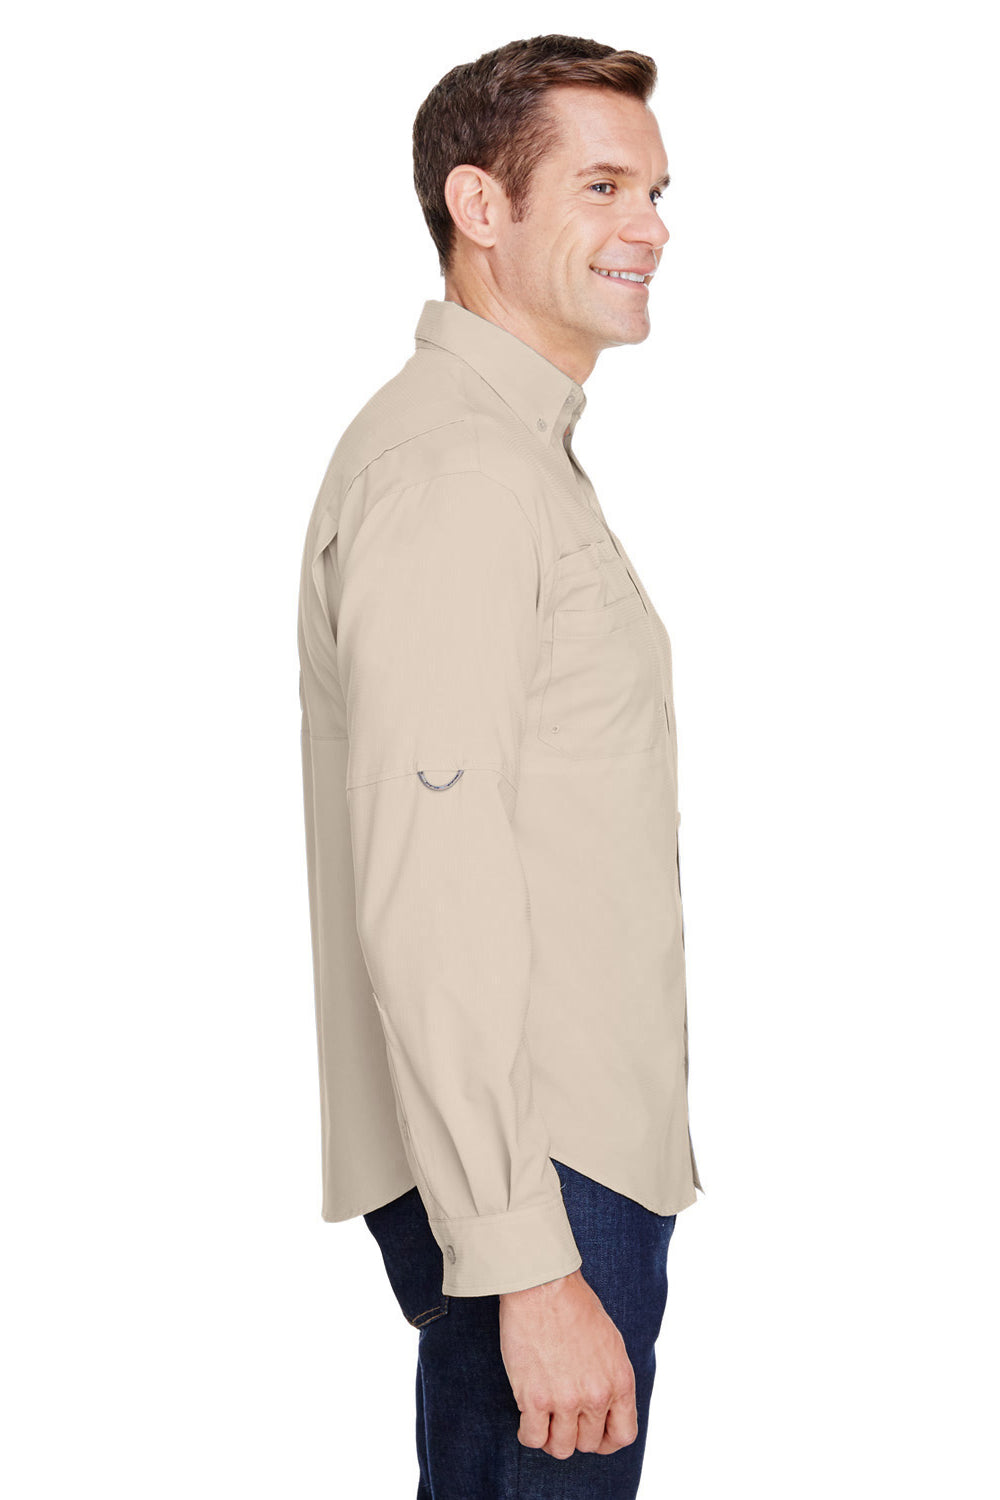 Columbia 7253 Mens Tamiami II Moisture Wicking Long Sleeve Button Down Shirt w/ Double Pockets Fossil Brown Side